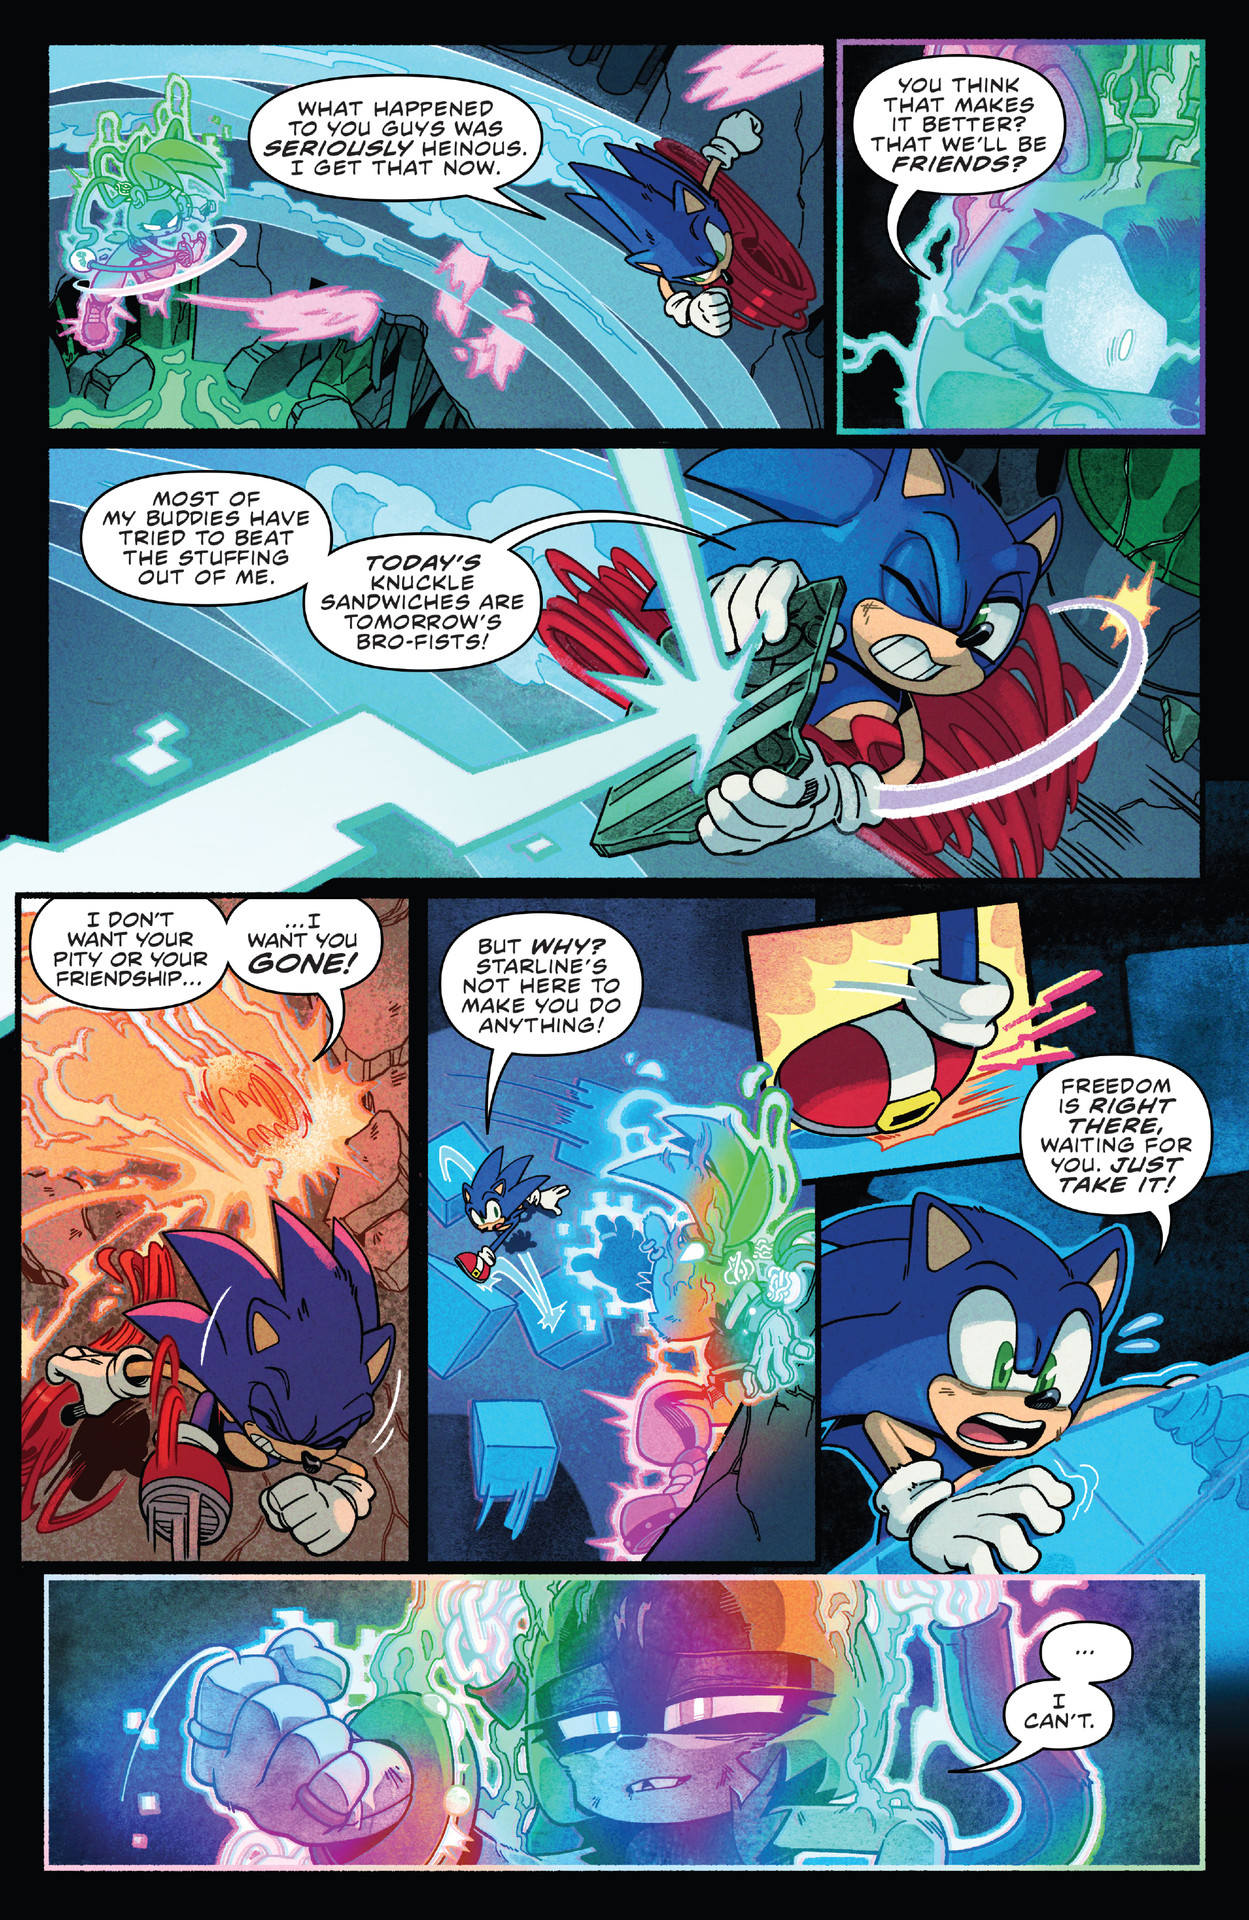 Finished issue 56 of IDW Sonic today, really liked this arc, so